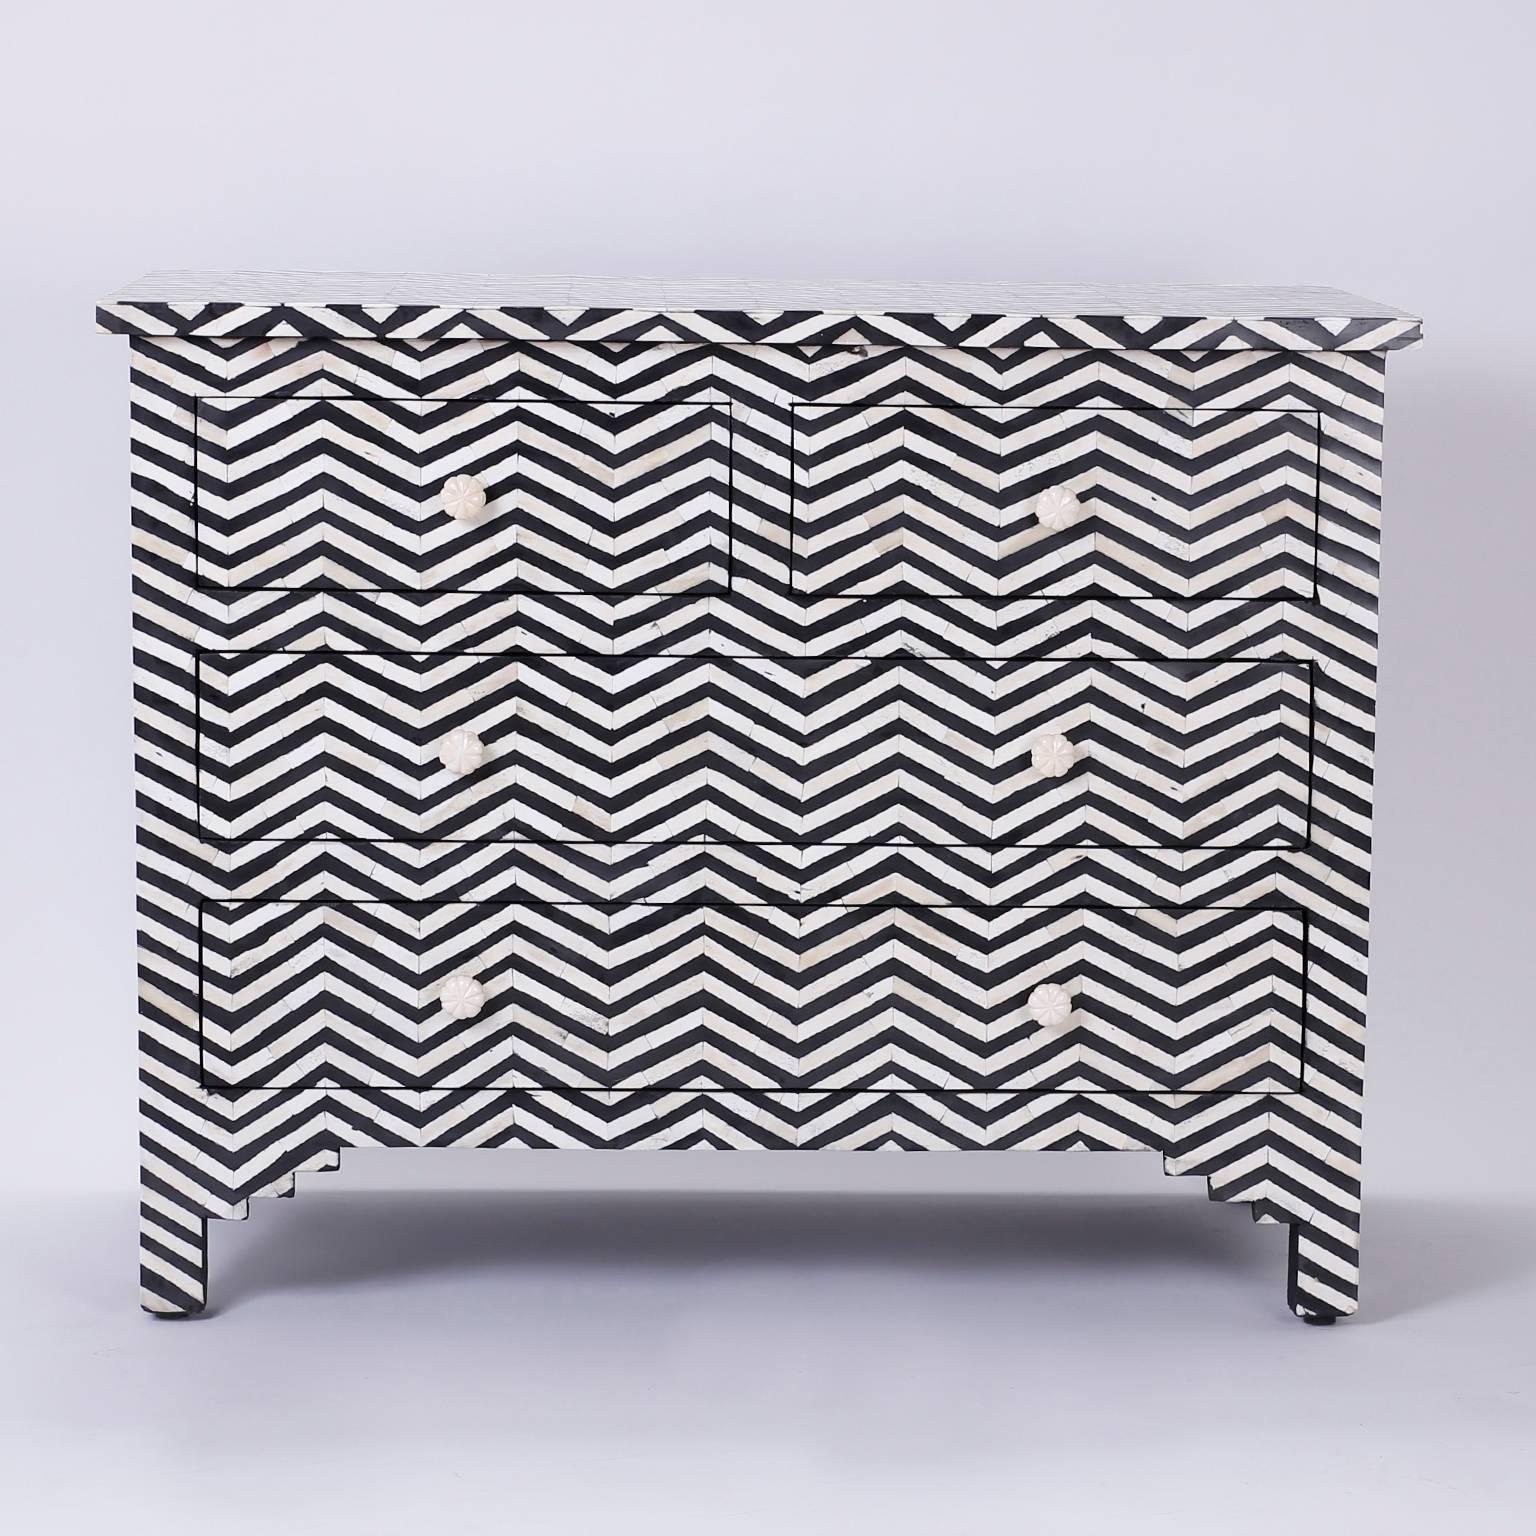 Indian Inlaid Bone Four-Drawer Chest with Chevron Pattern